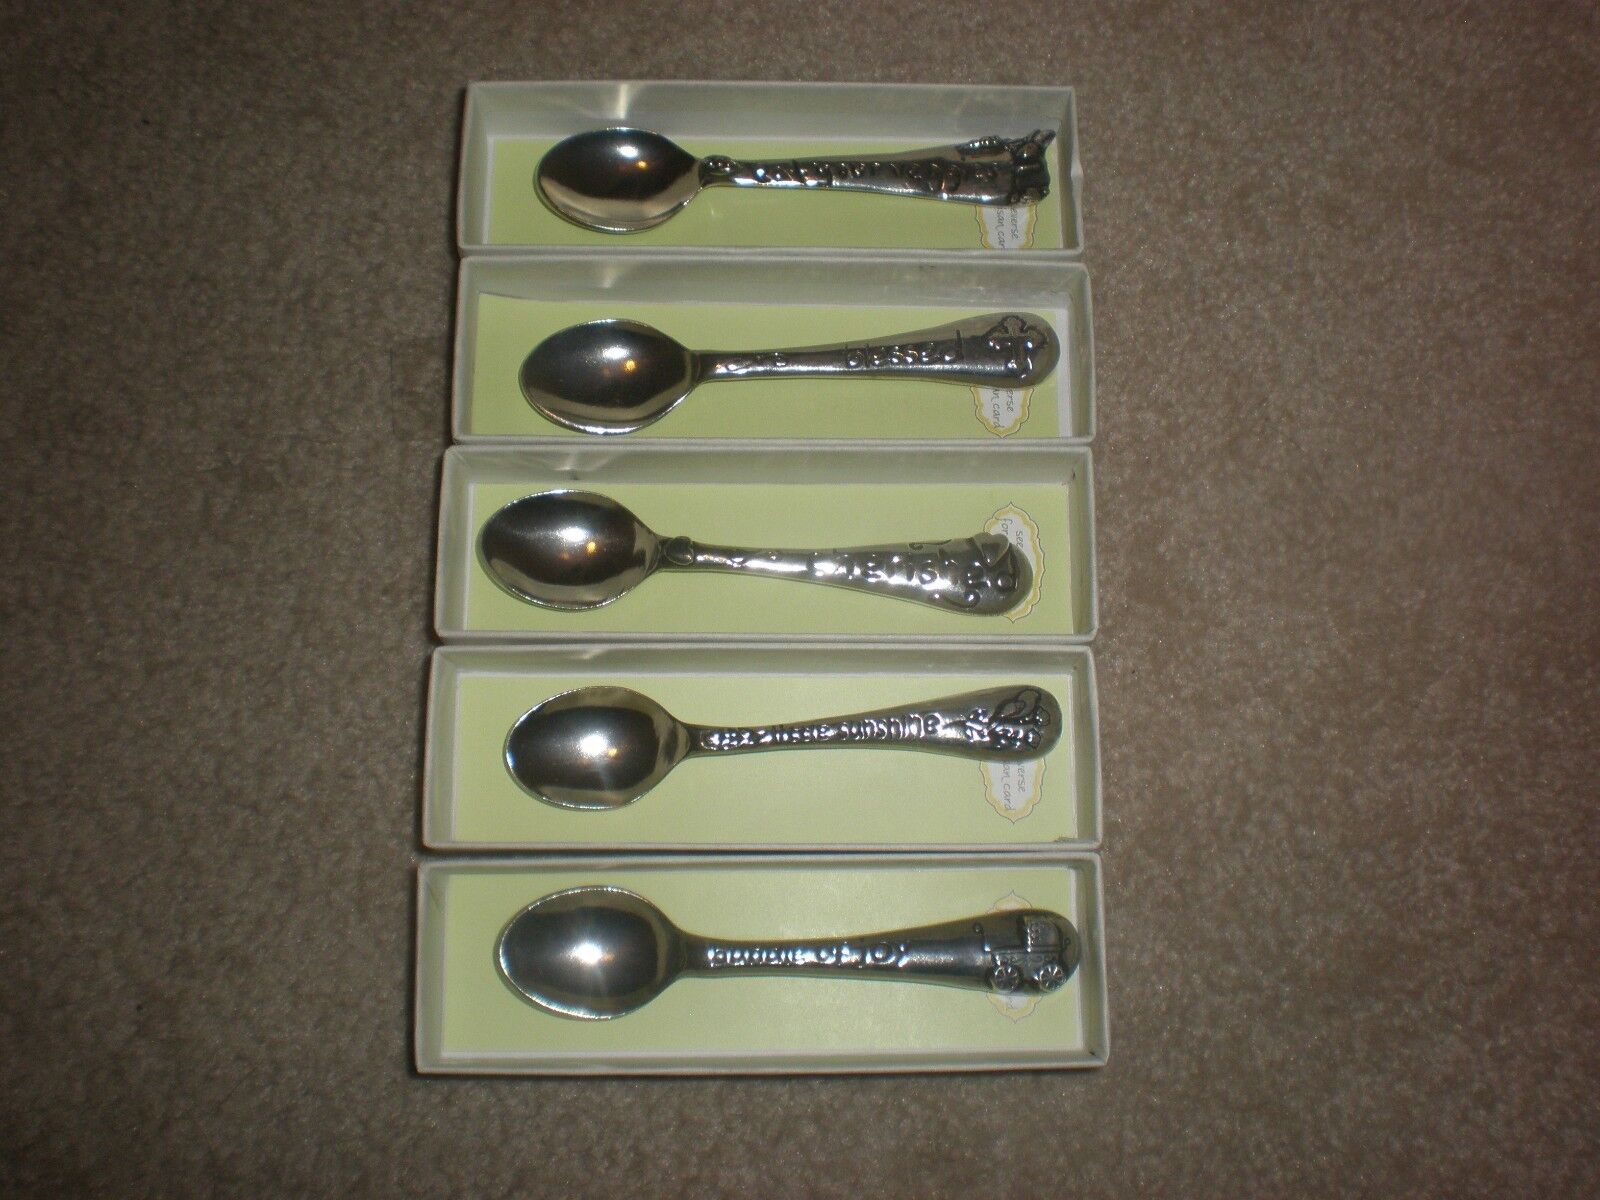 METAL MORPHOSIS Quantity limited Chicago Mall BABY SPOON HAVE ONLY LEFT “BLESSED”